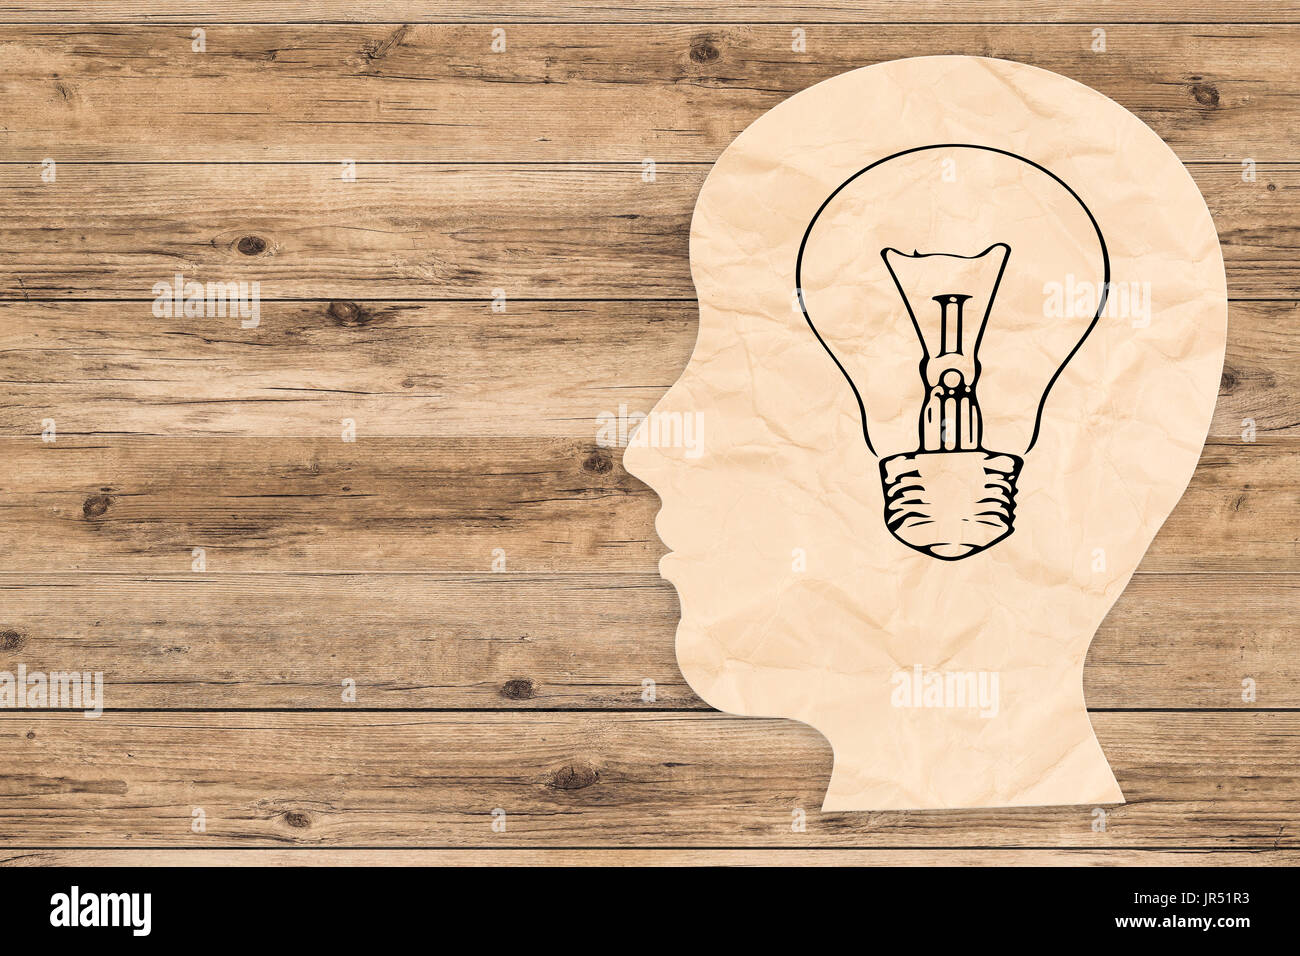 idea concept with side face and light bulb on wooden background Stock Photo